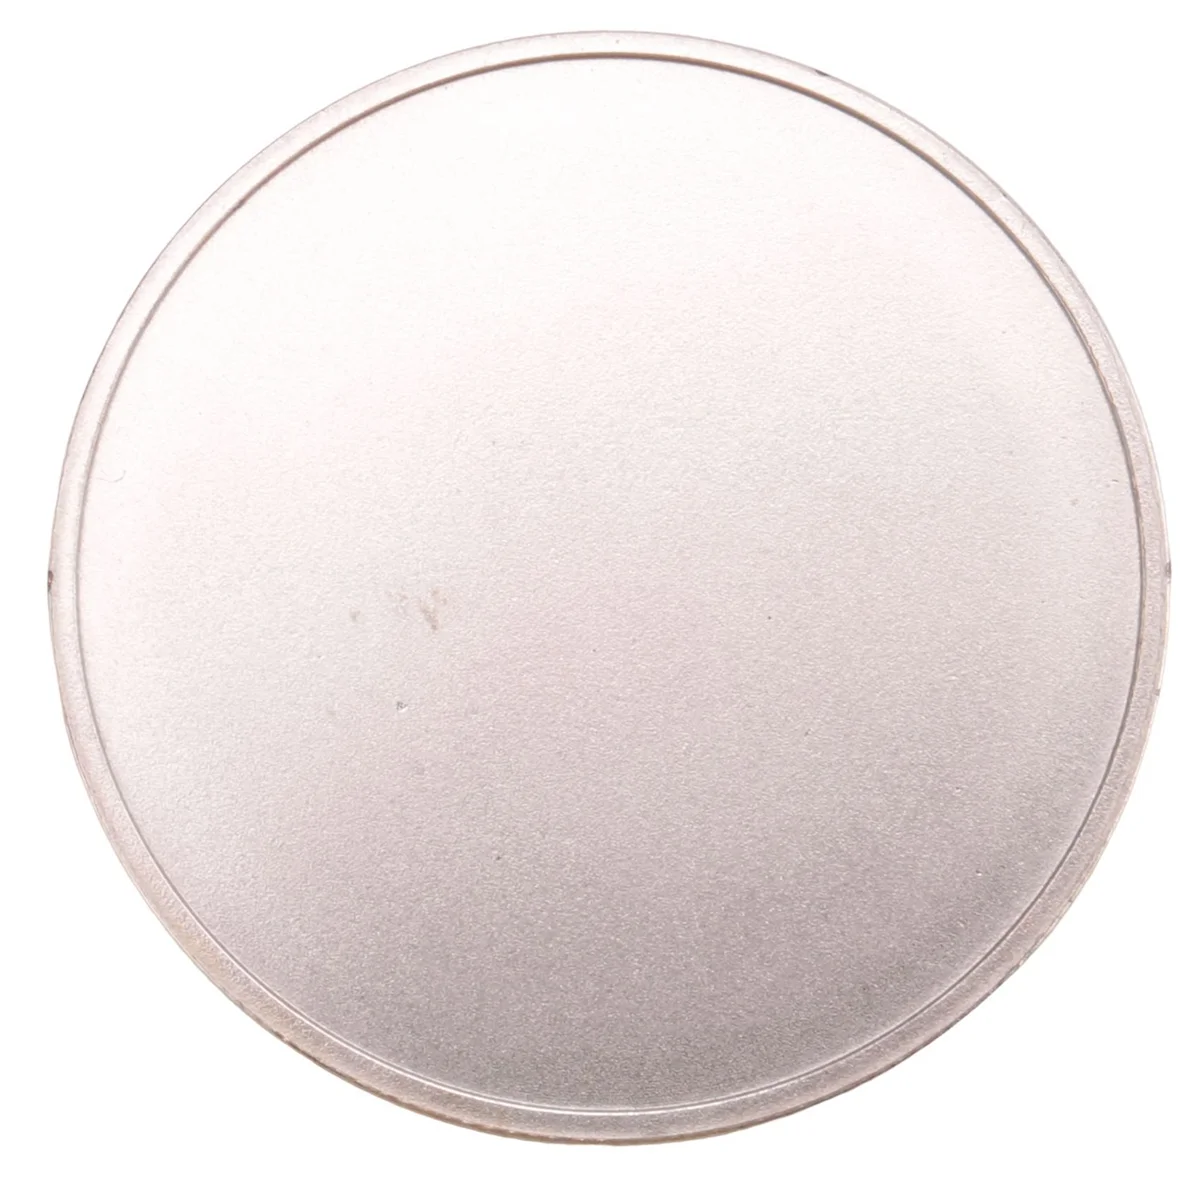 

10 Pcs Blank Challenge Coin, Engraving Blanks Coins, 40mm Diameter with Acrylic Protection Box (Zinc Alloy)